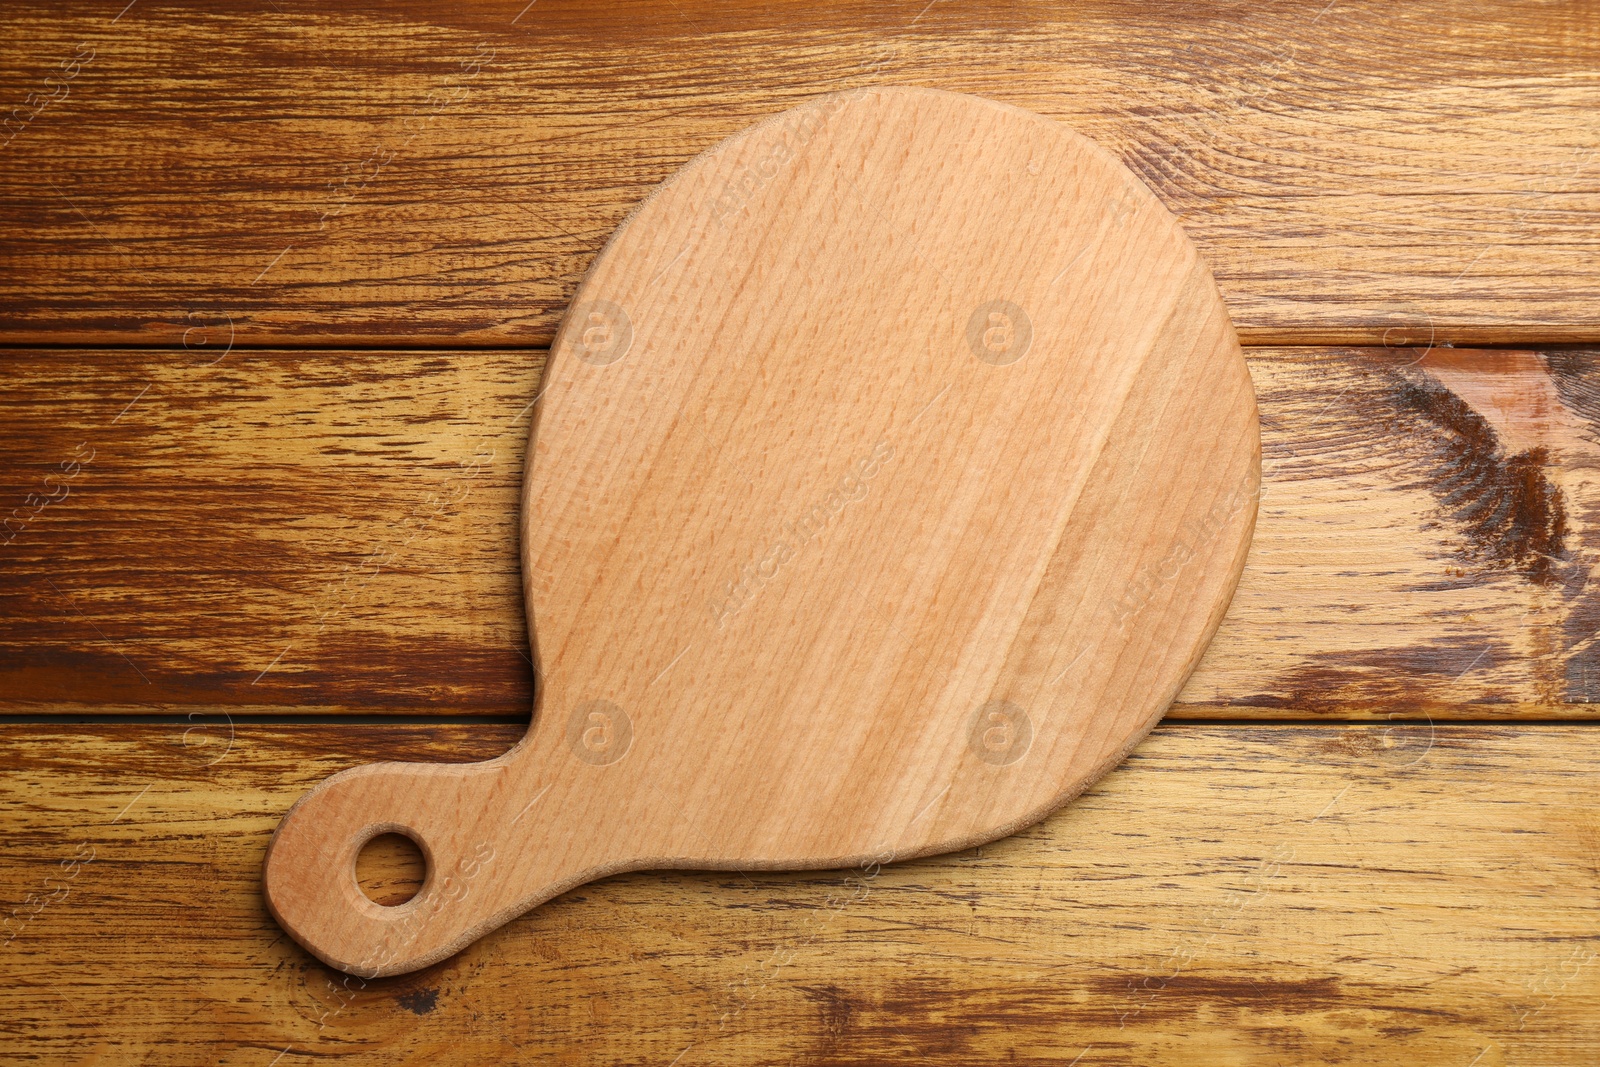 Photo of New cutting board on wooden table, top view